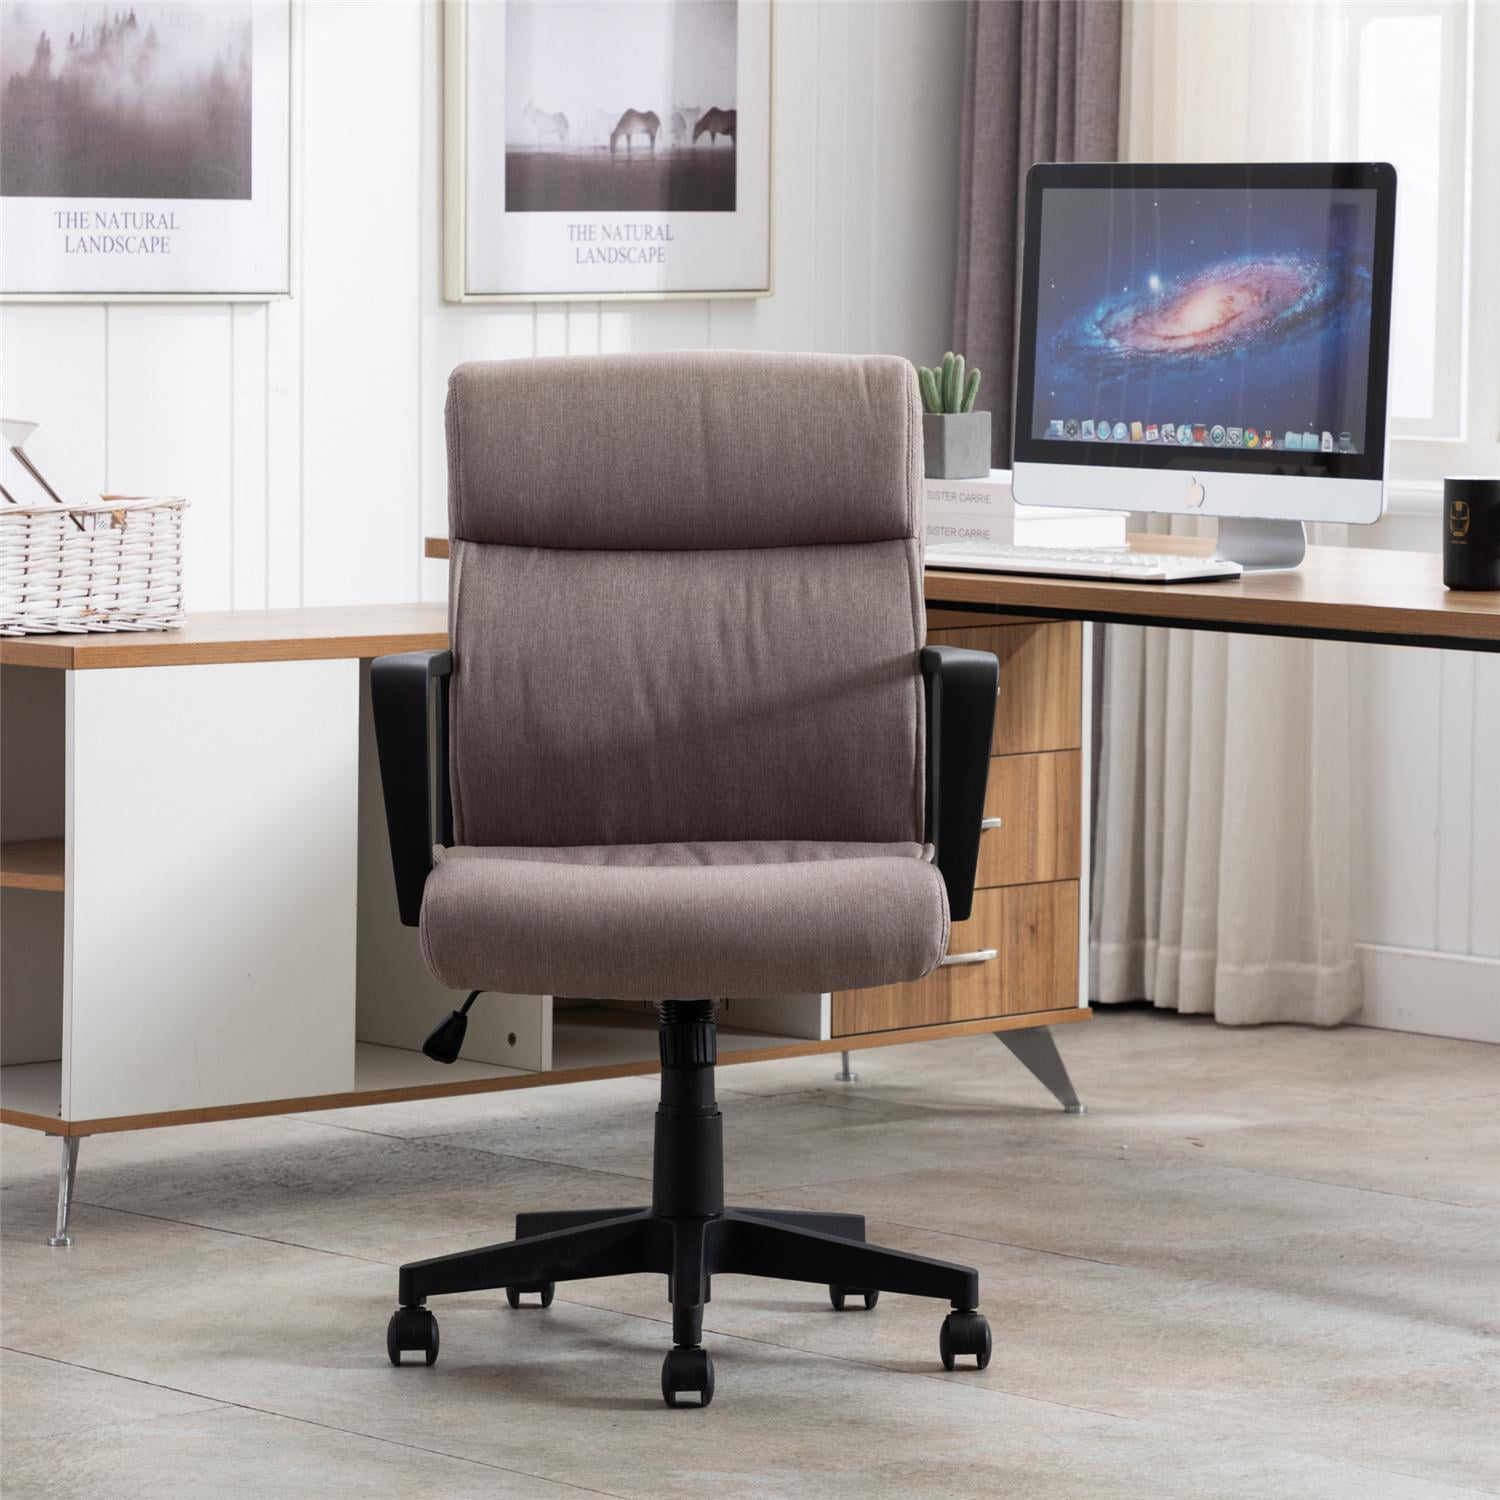 Ergonomic Swivel Home Office Chair, Spring Cushion Mid Back Executive